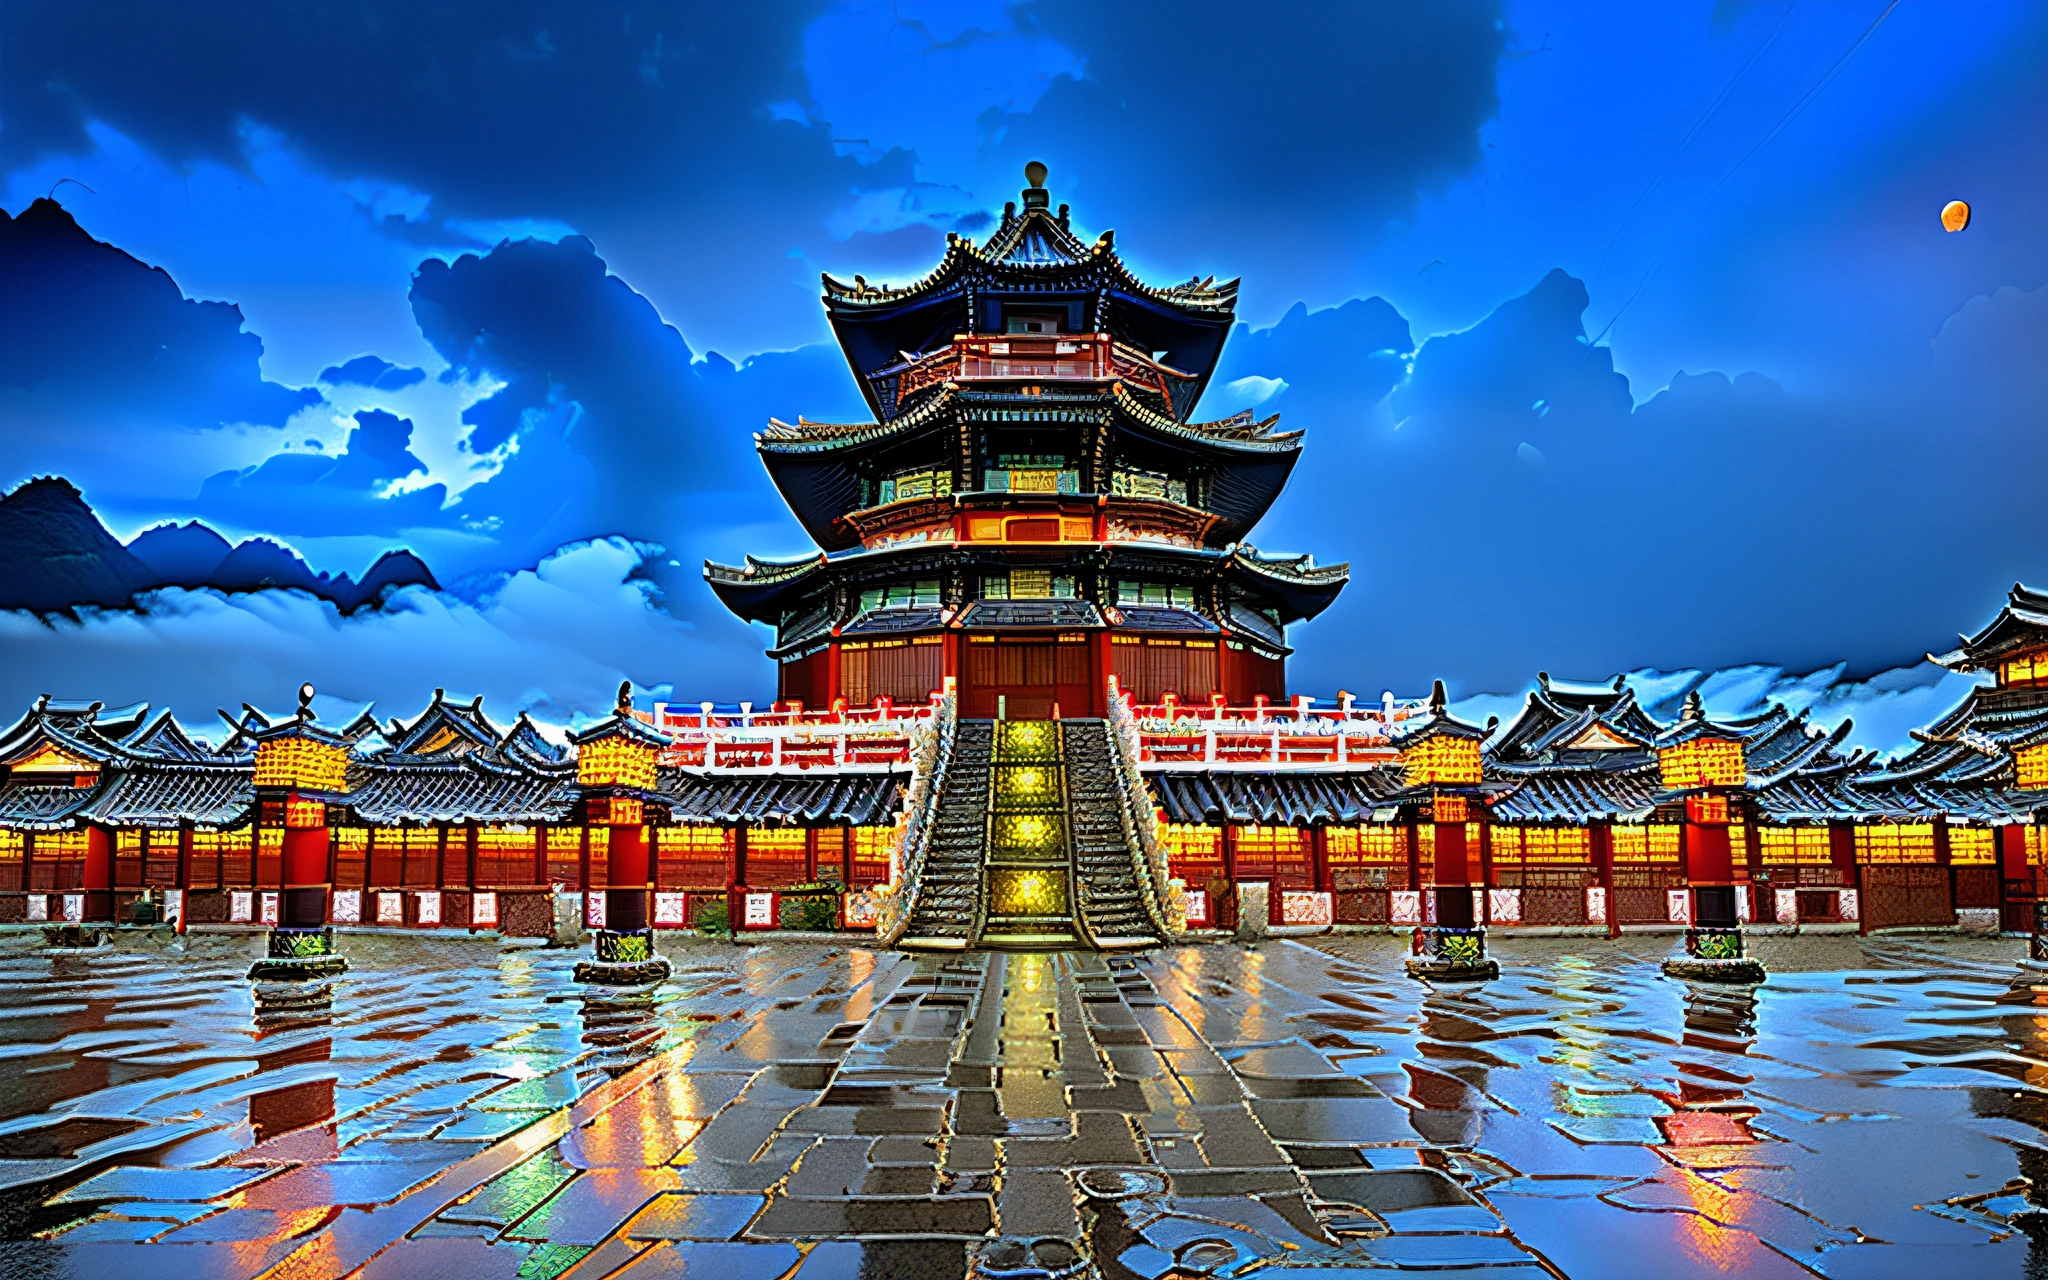 Lots of lights on the building, fantastic Chinese town, Chinese village, amazing wallpapers, japanese town, japanese village, surreal photo of a small town, old asian village, japanese city, Raymond Han, rainy night, cyberpunk ancient Chinese castle, beautifully lit architecture, evening in the rain, beautiful and aesthetic, photography, movie, 8k, high detail ((heavy rain)))